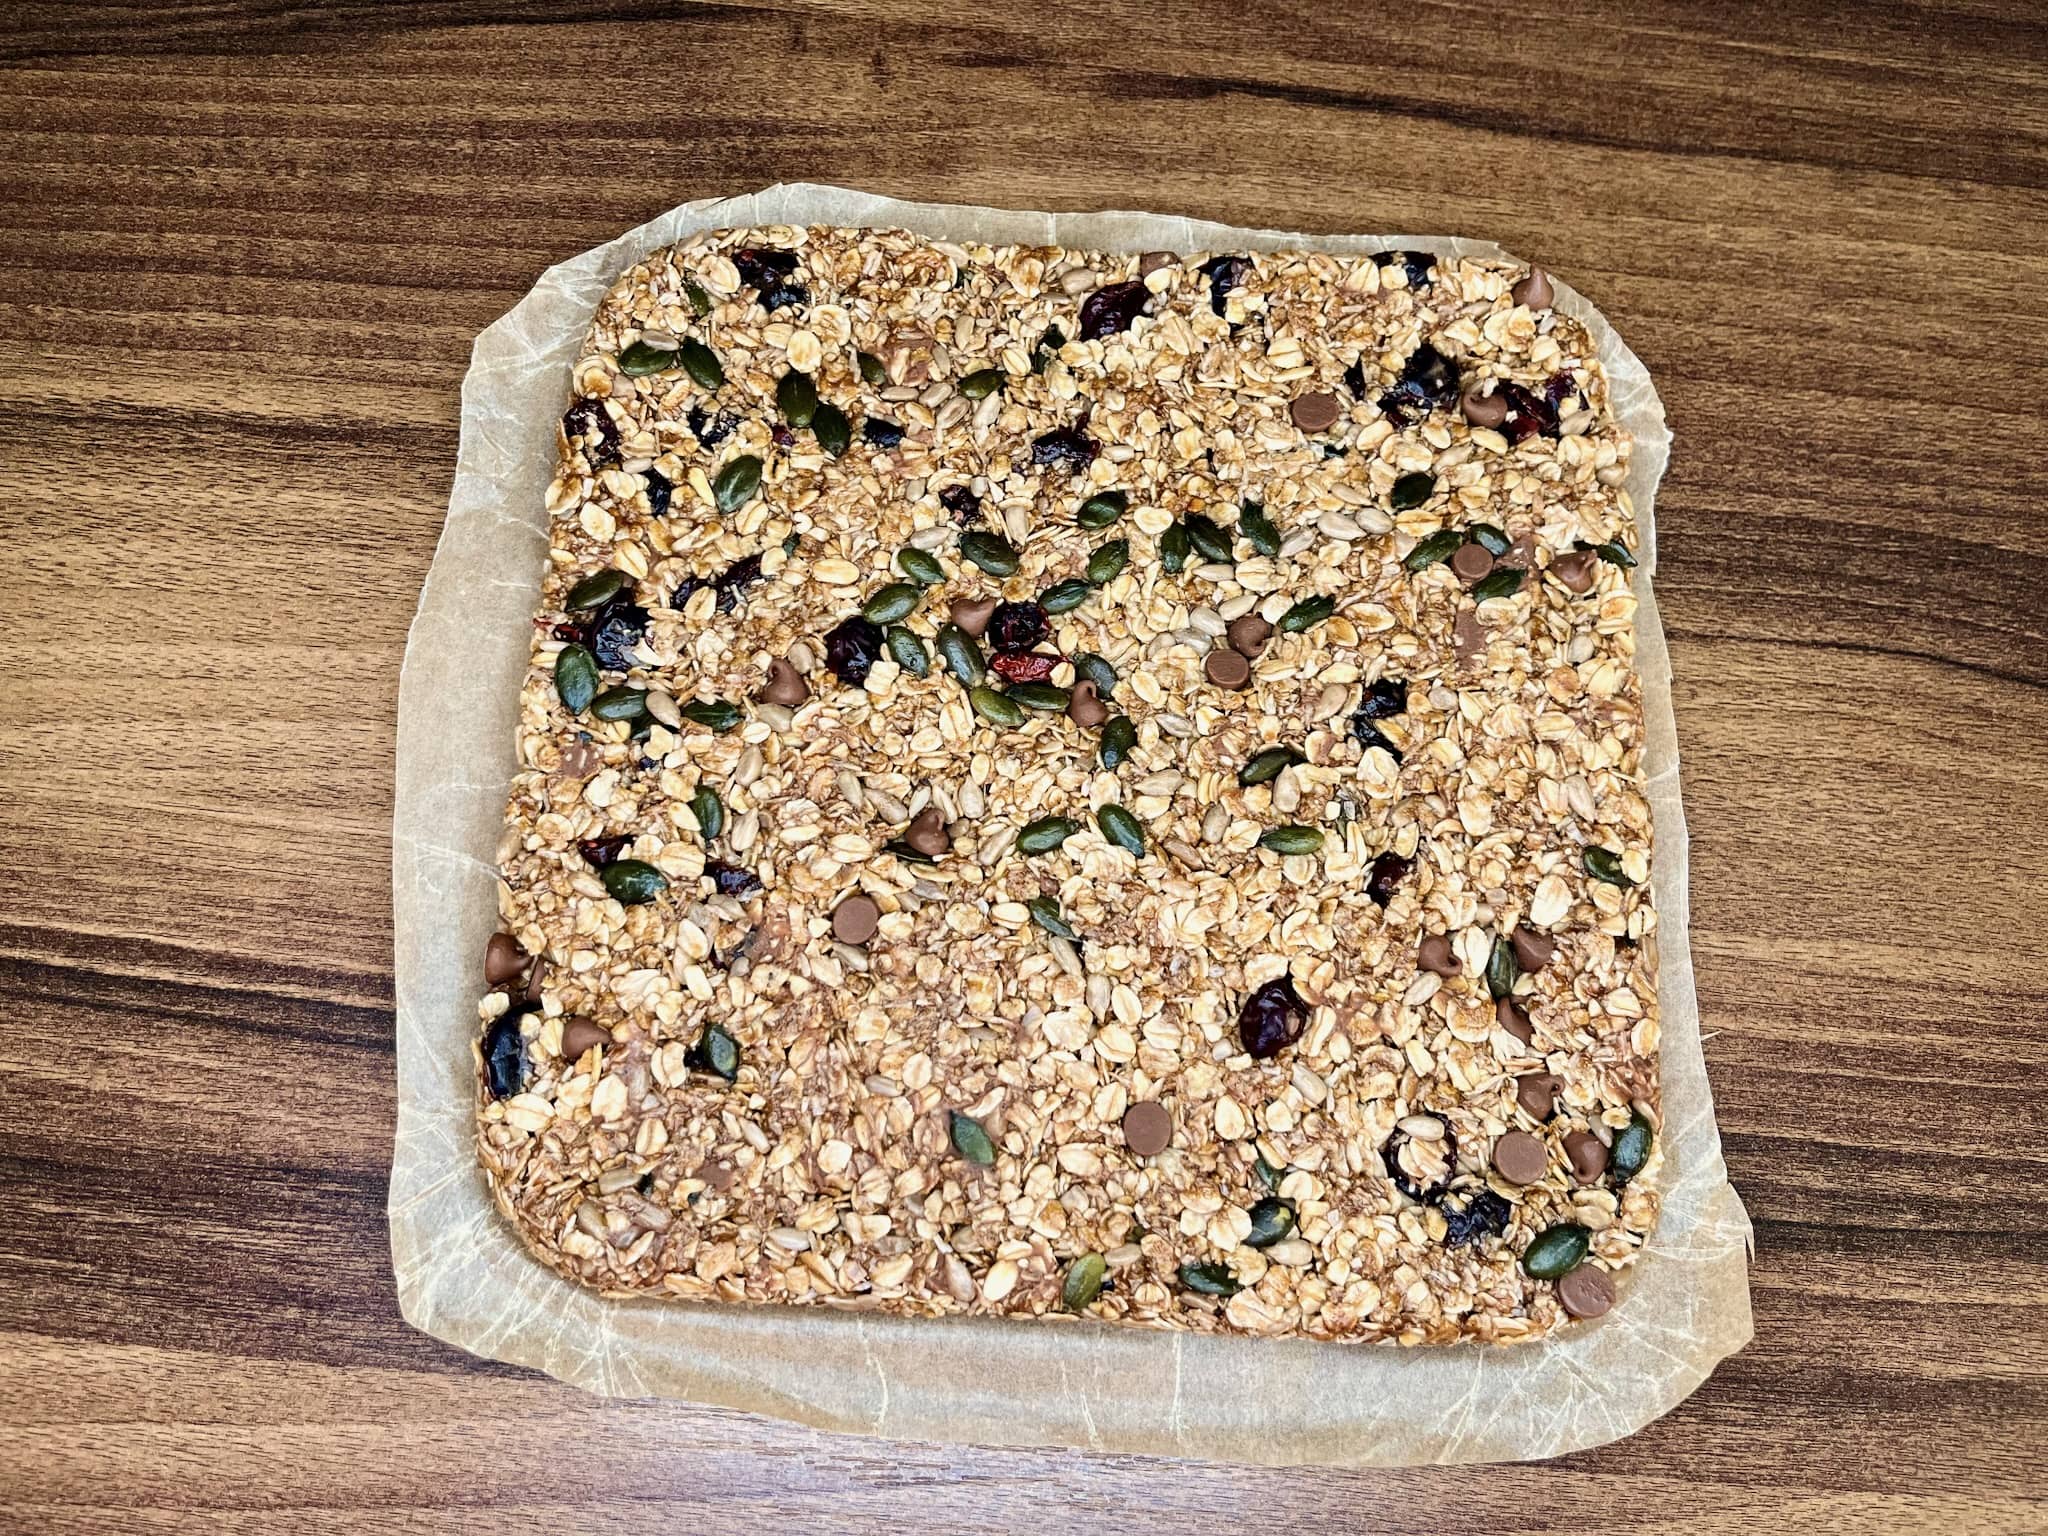 The muesli bar mixture is set aside after being removed from the tray